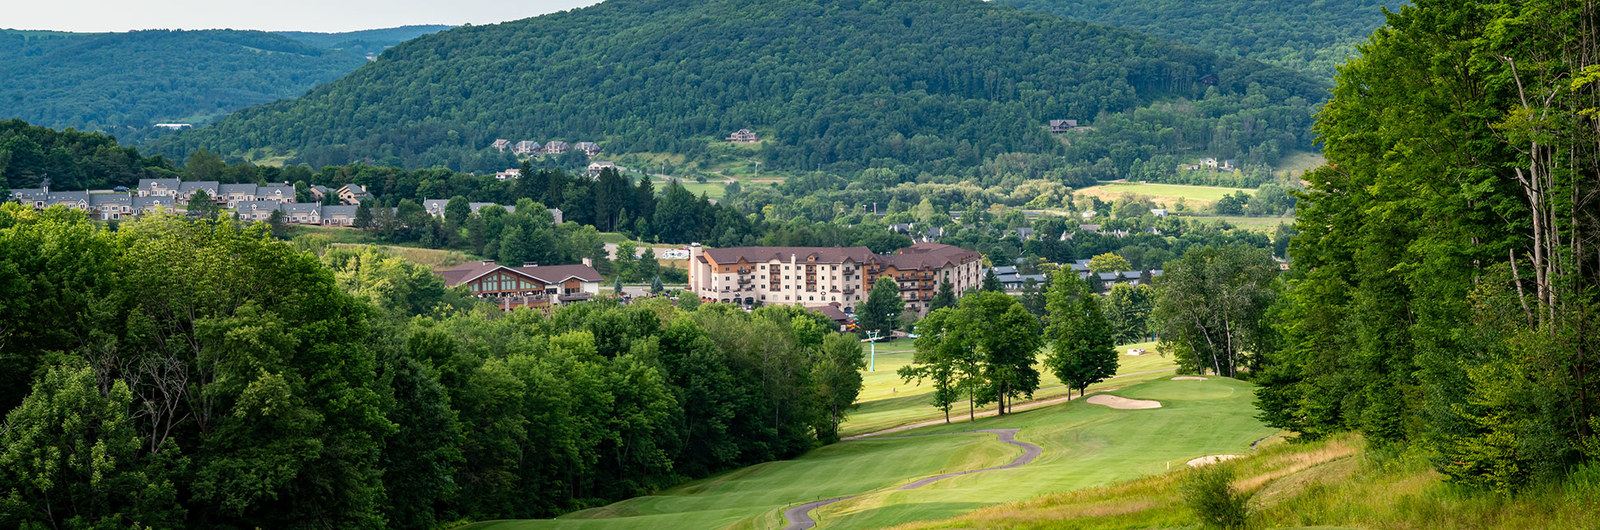 View of gold course fairway with view of Holiday Valley lodge in the distance